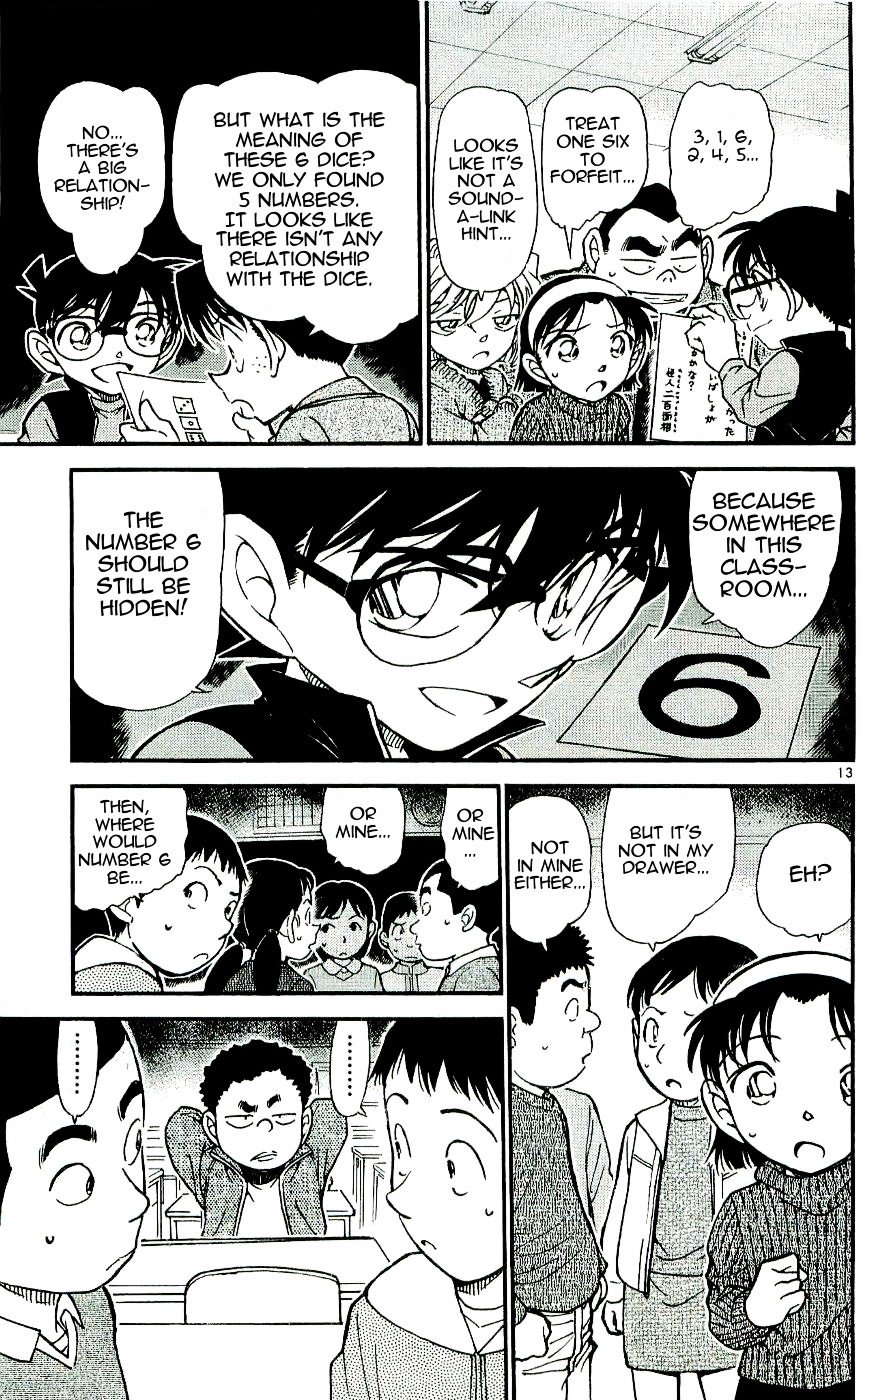 Detective Conan chapter 548 page 13